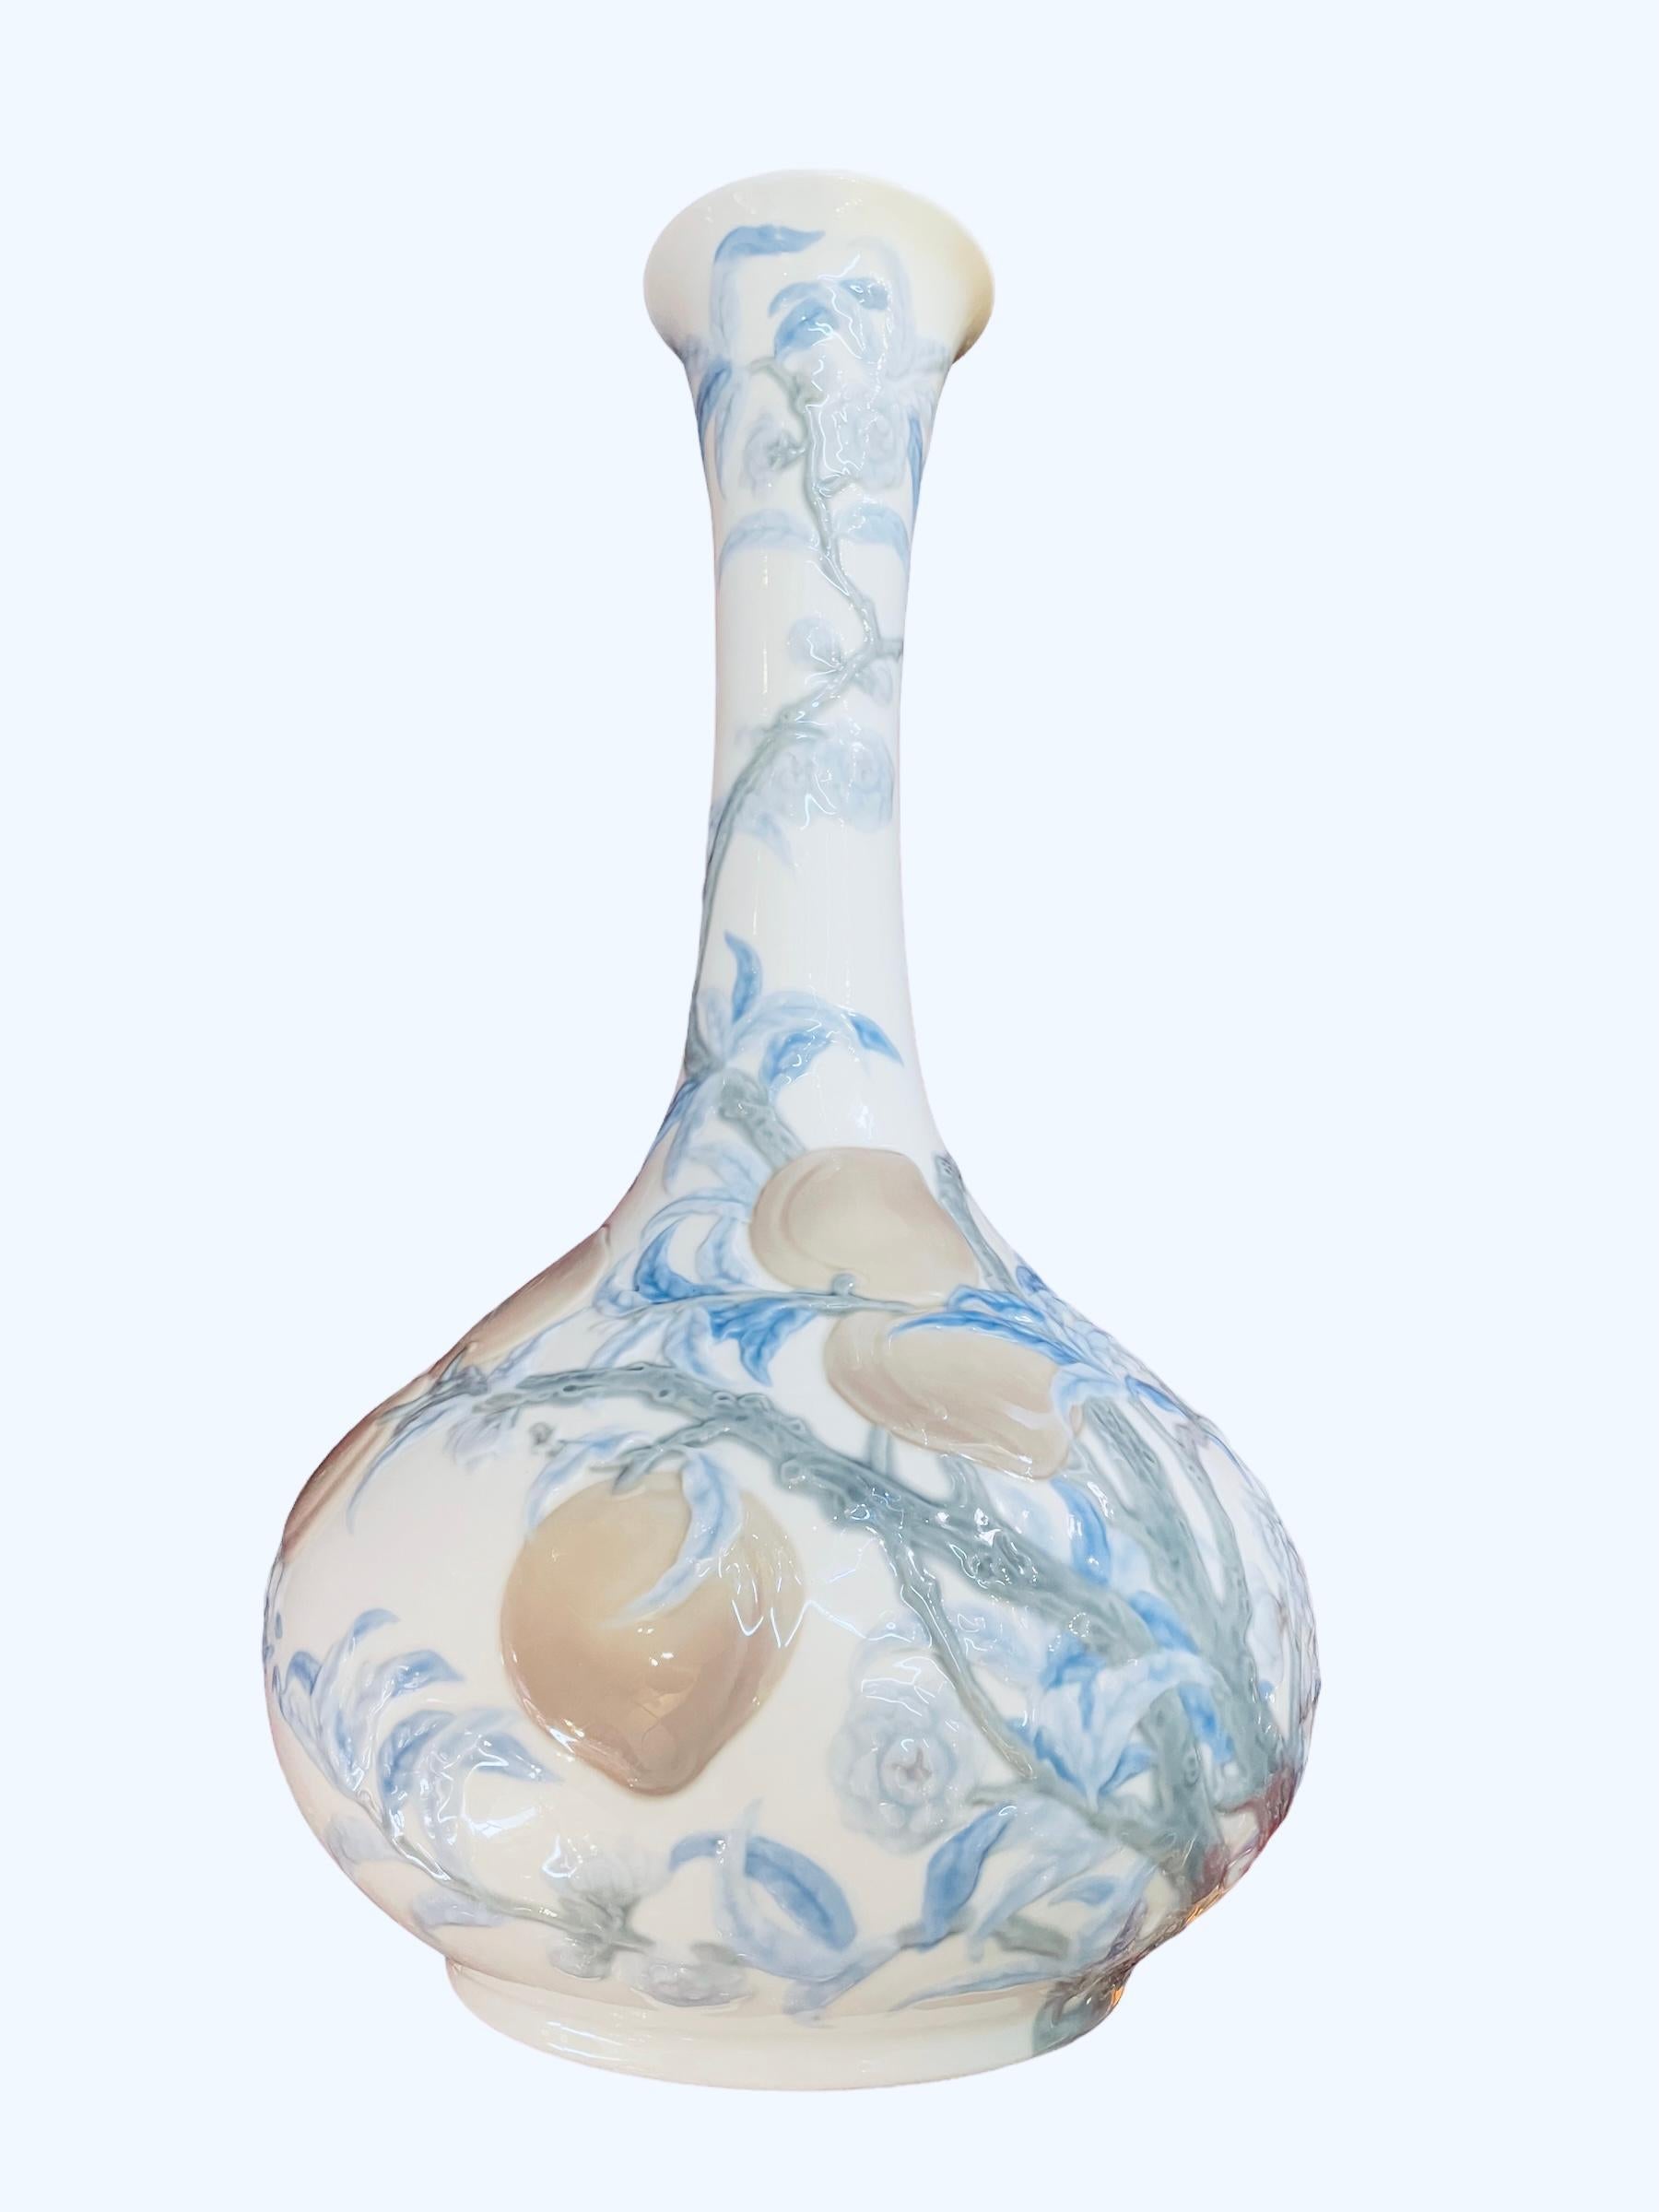 This a Lladro soft glow porcelain flower gourd vase. It is hand painted white in the background with a repousse of long light green branches with light blue leaves and flowers plus rose-orange color peaches hanging from them. Under the base is